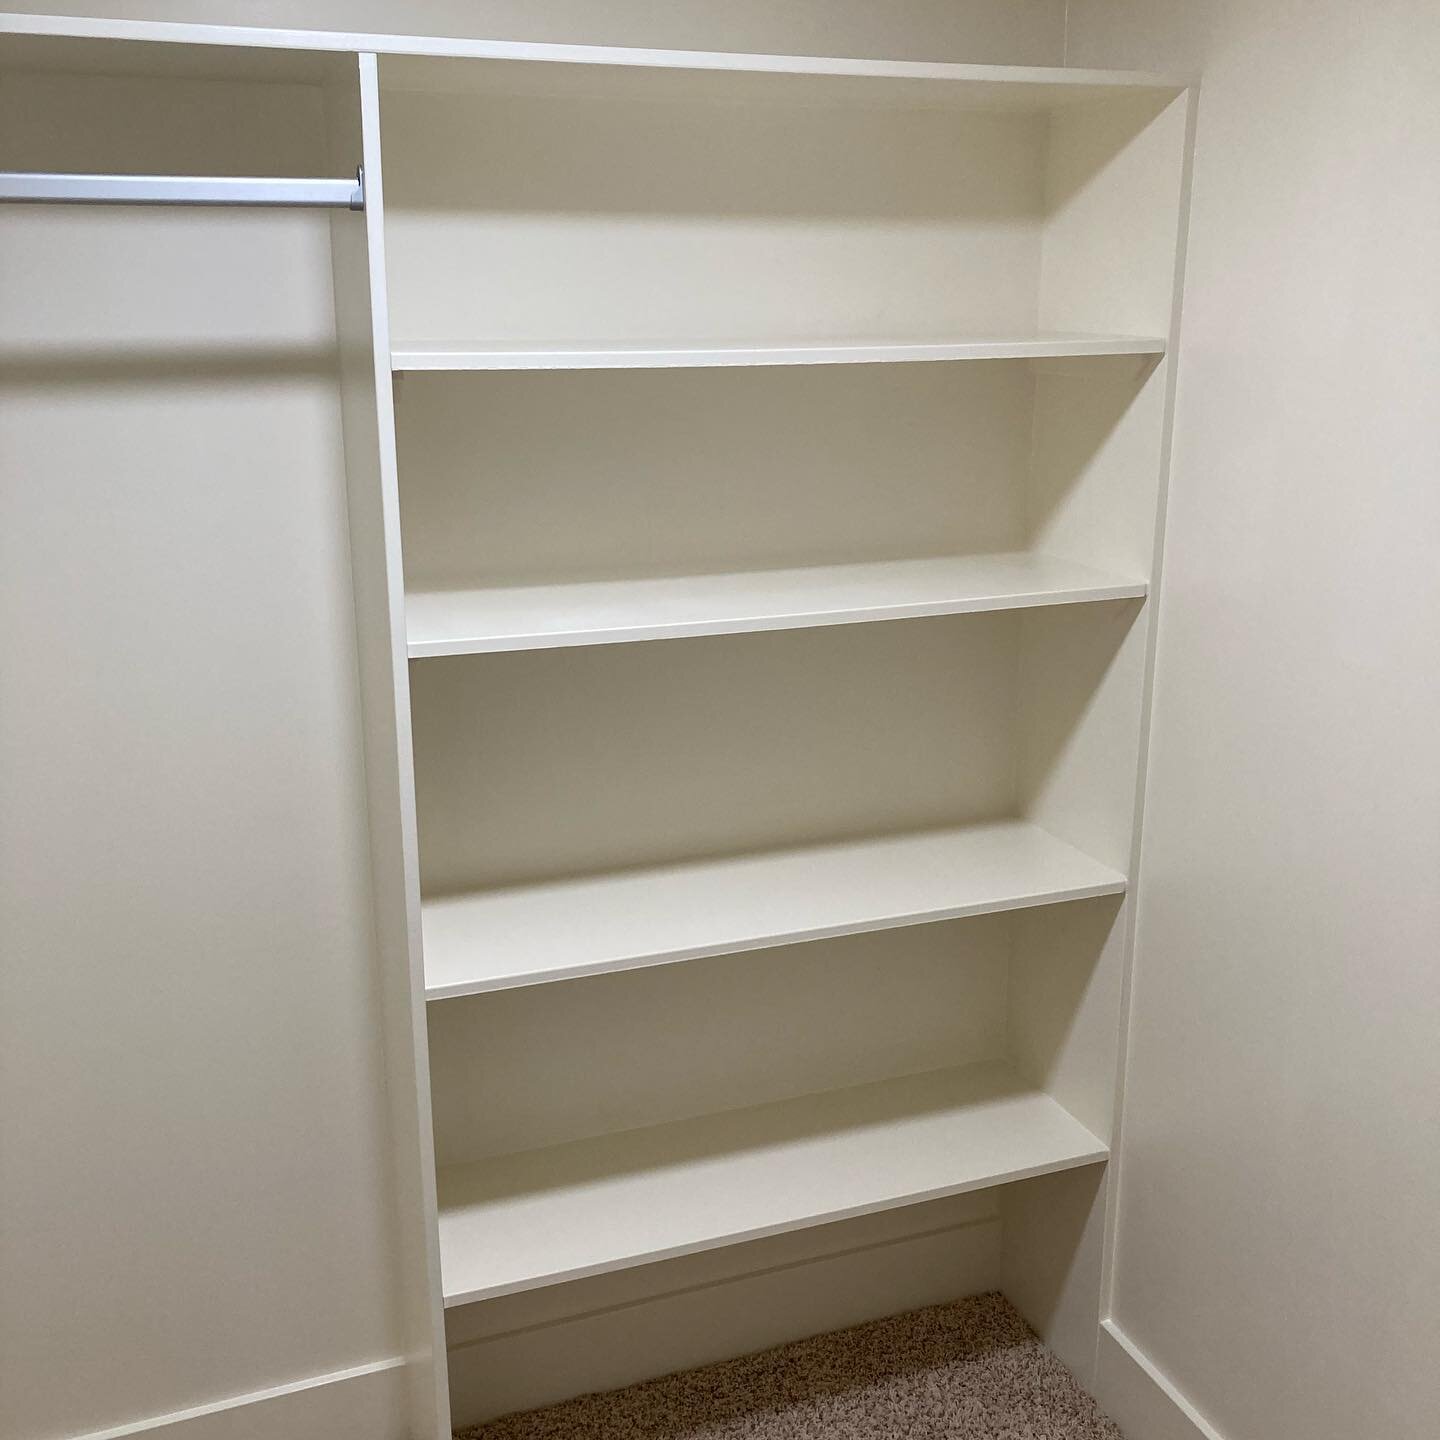 Some water damage to the ceiling in this closet resulted in a drywall repair and some new built in shelving to make better use of the space for the client. Turned out great!

#remodel #closet #builtins #flannelhomes